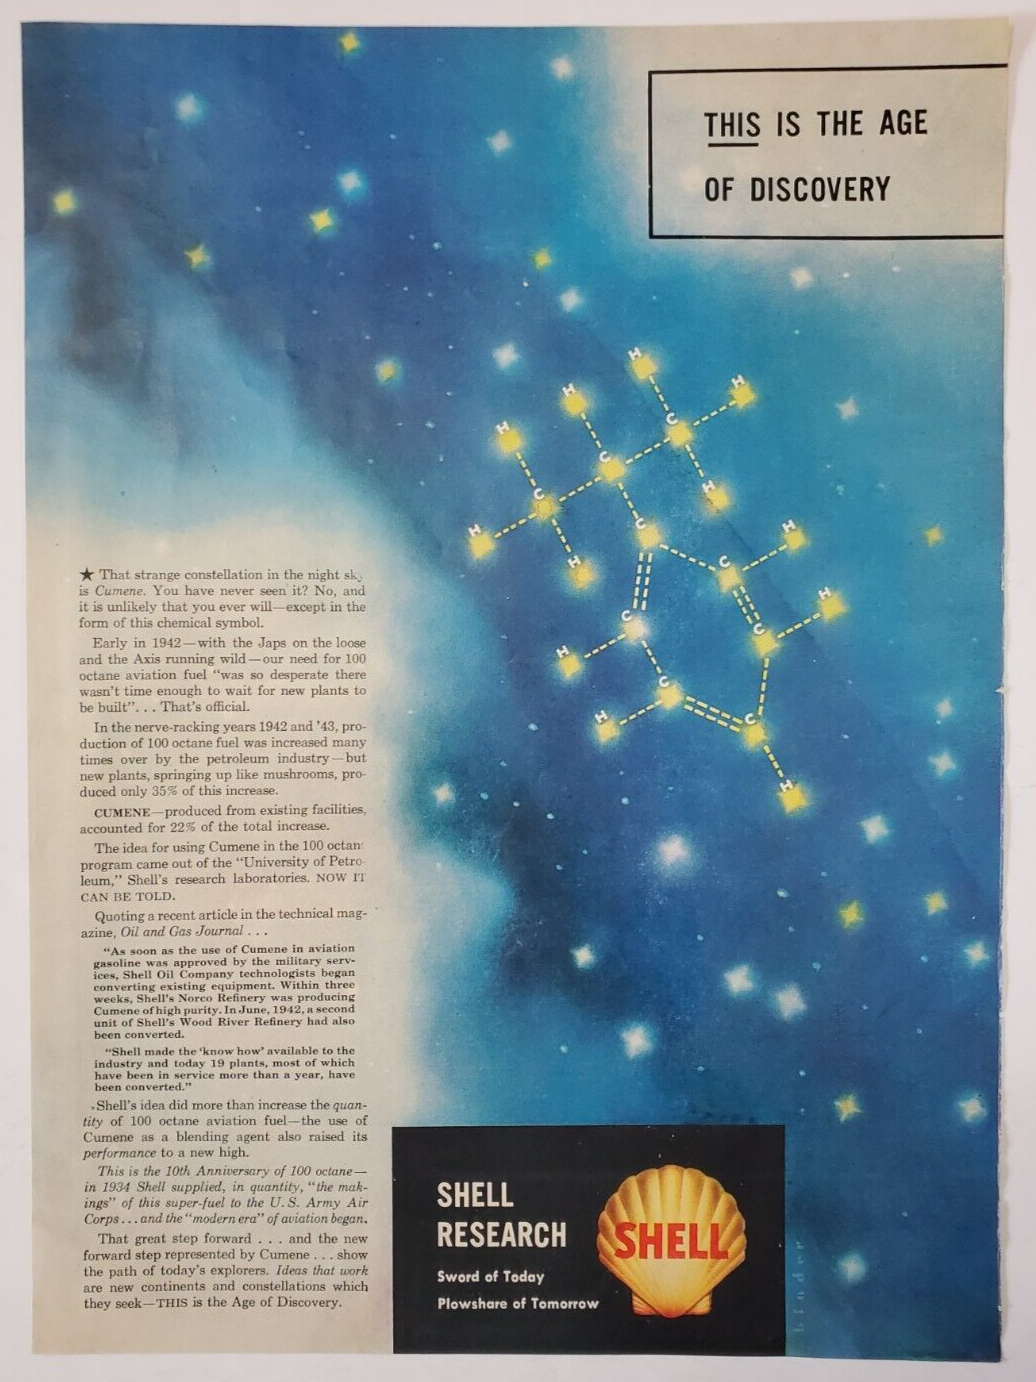 1944 Shell Research Vintage WWII Print Ad This Is The Age Of Discovery - $15.50